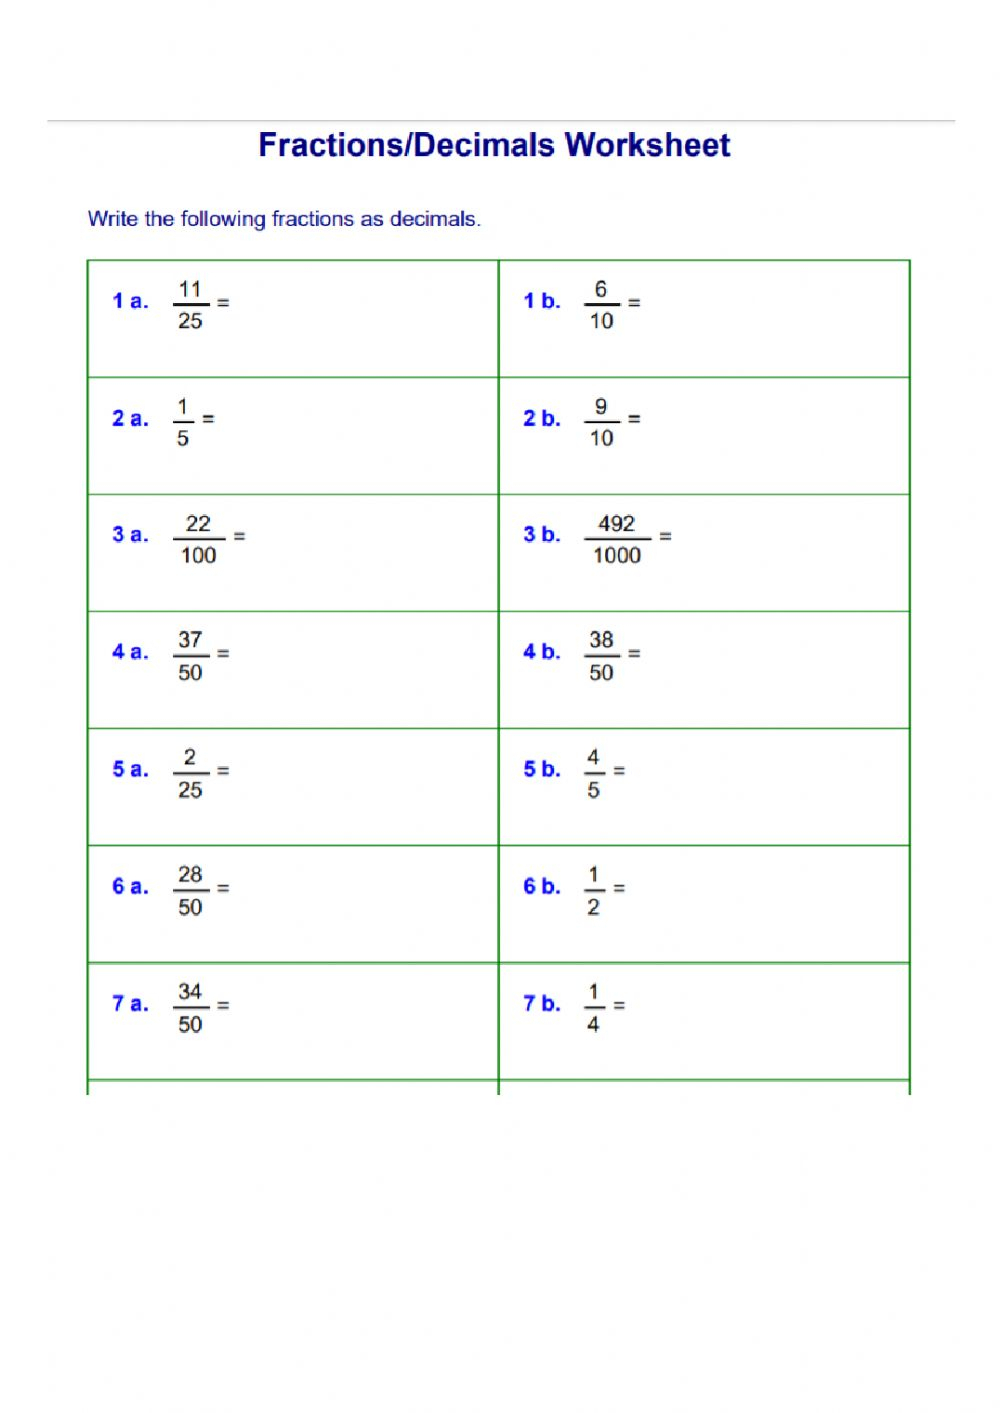 Converting Fractions To Decimals Worksheet With Answers Worksheets 